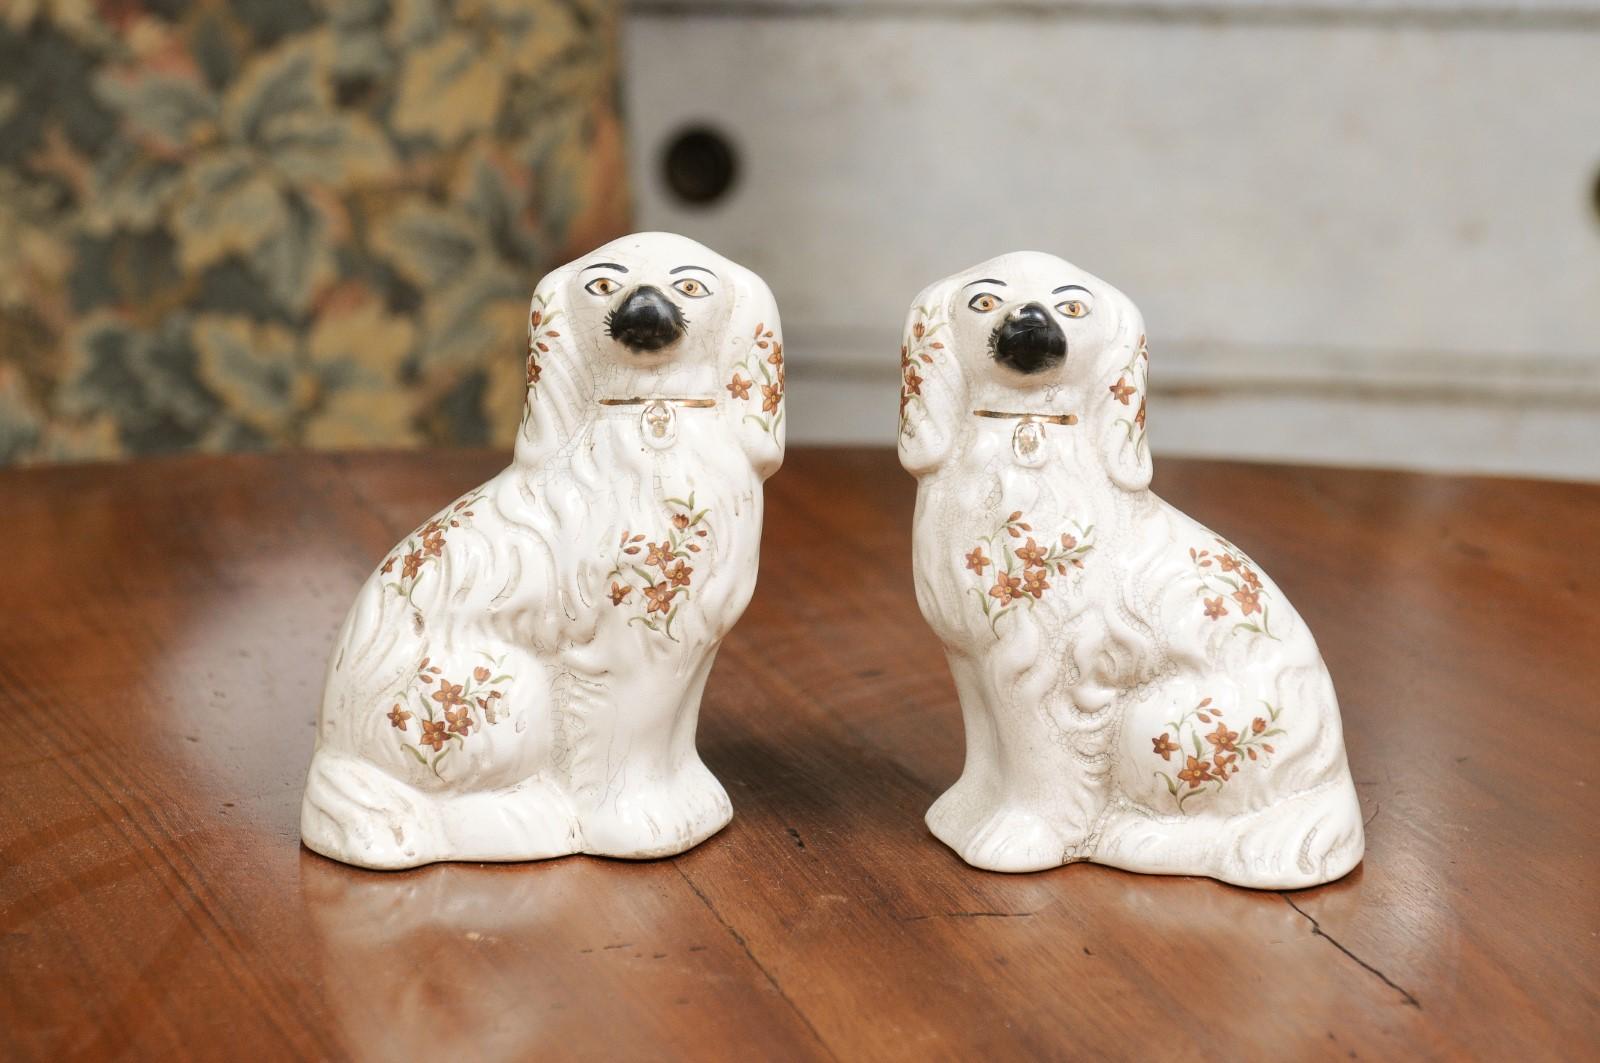 A pair of English Victorian period Staffordshire white dogs from the 19th century with hand-painted floral motifs. Created in England during the reign of Queen Victoria, this pair of Staffordshire features two sitting white toned Spaniel dogs,